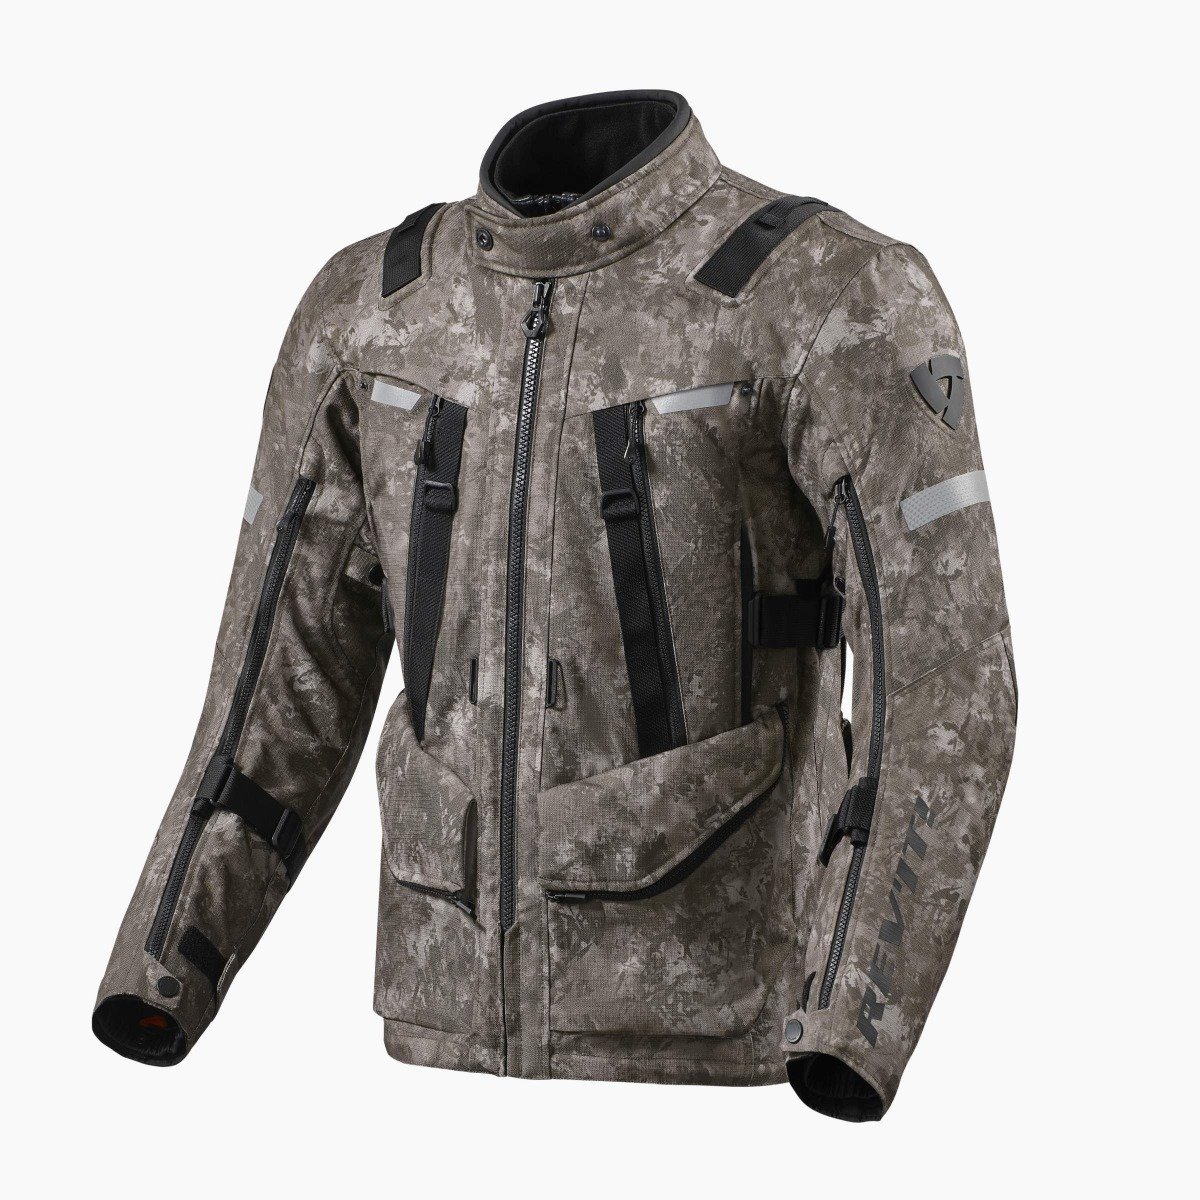 Image of REV'IT! Sand 4 H2O Jacket Camo Brown Talla S